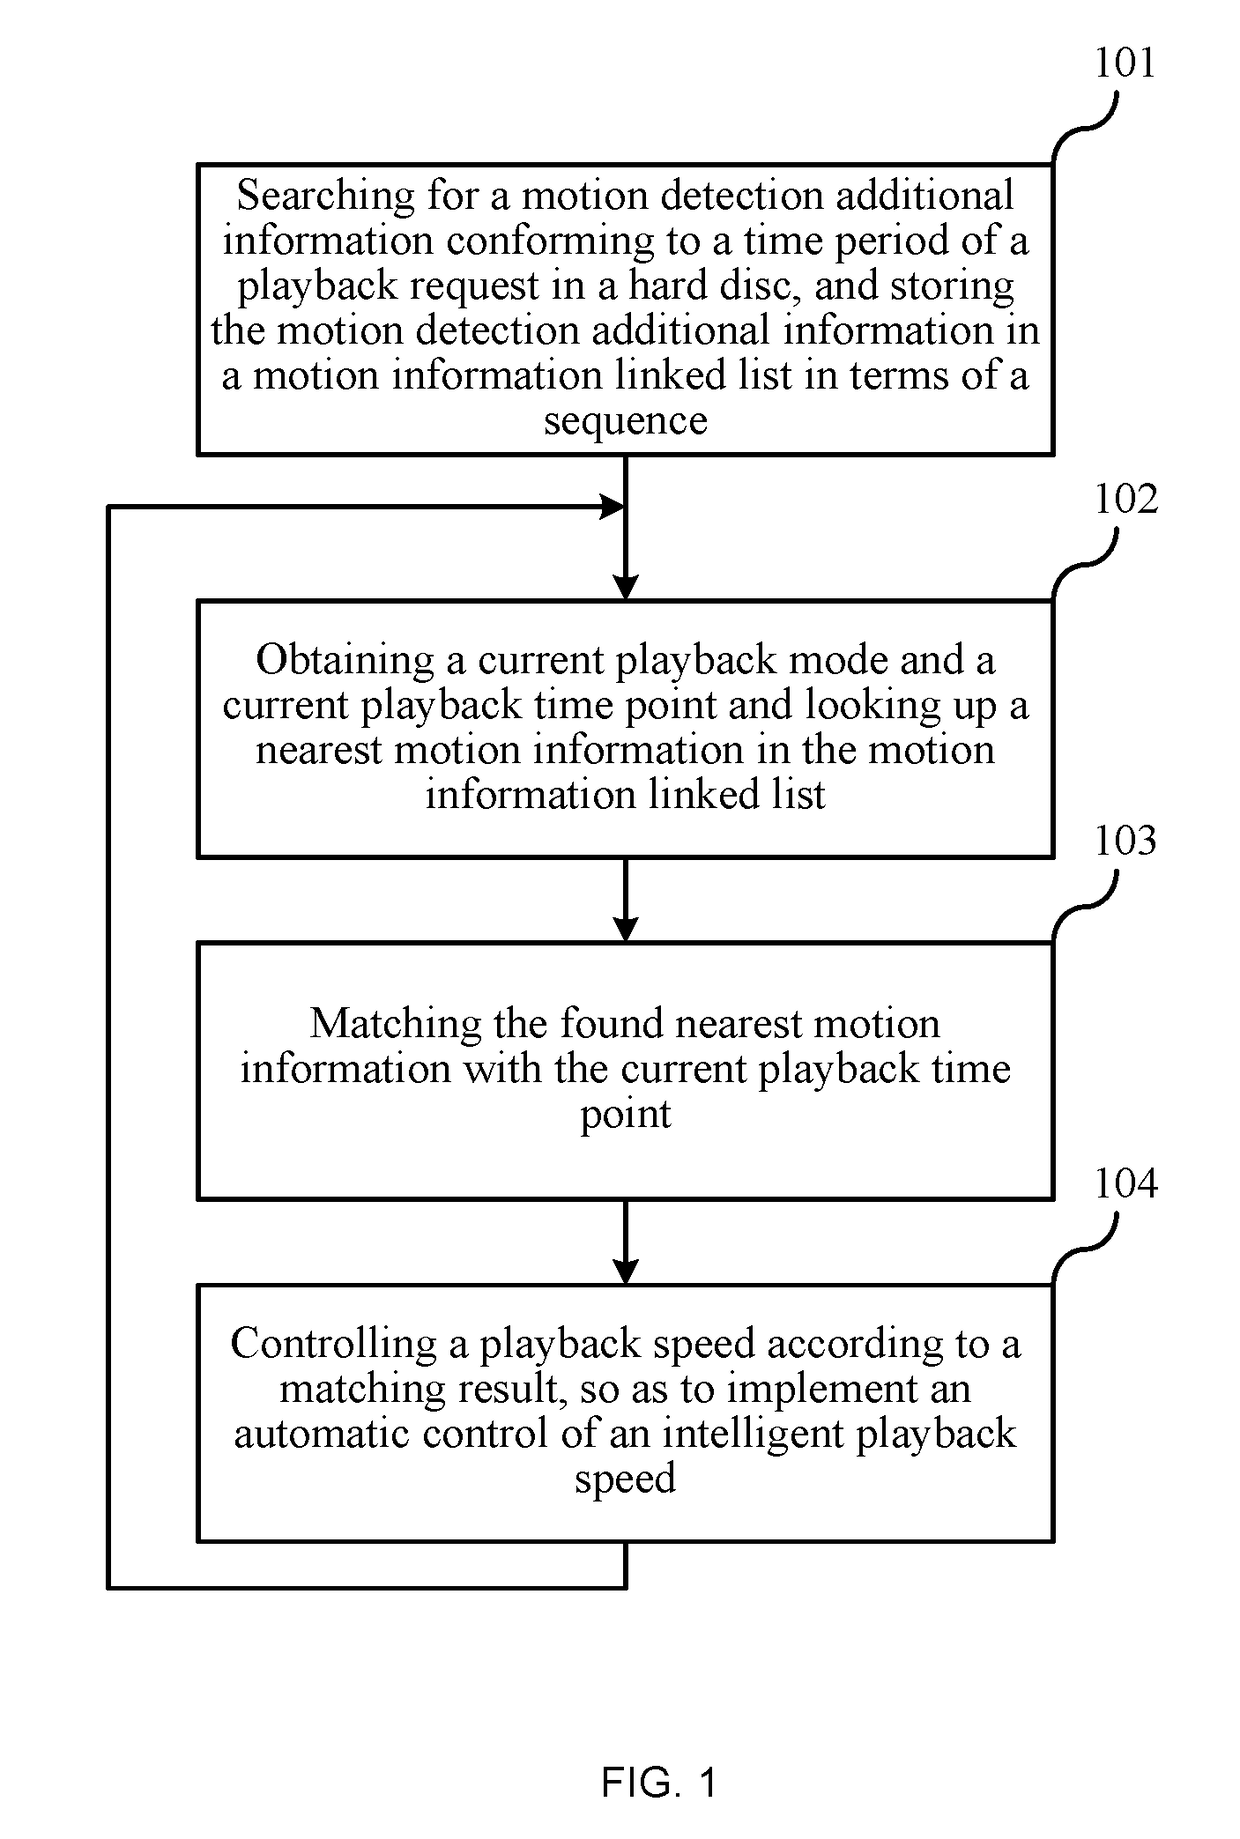 Intelligent playback method for video records based on a motion information and apparatus thereof